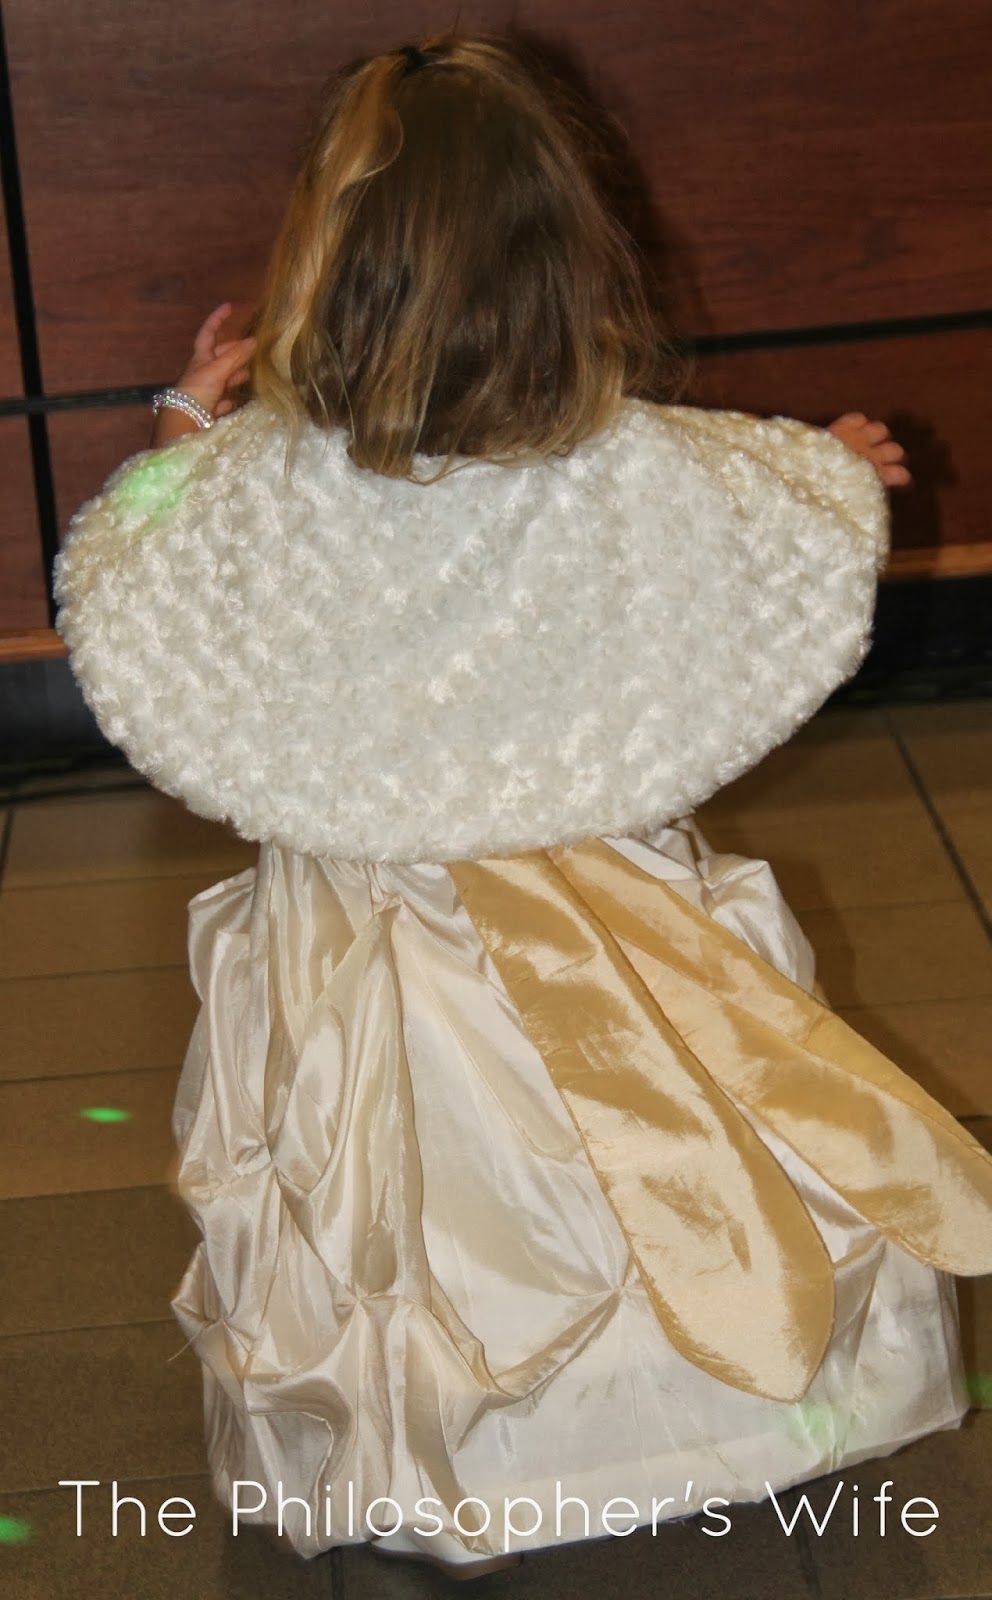 The Philosopher's Wife: A Sewing Project: Capes for Flower Girls